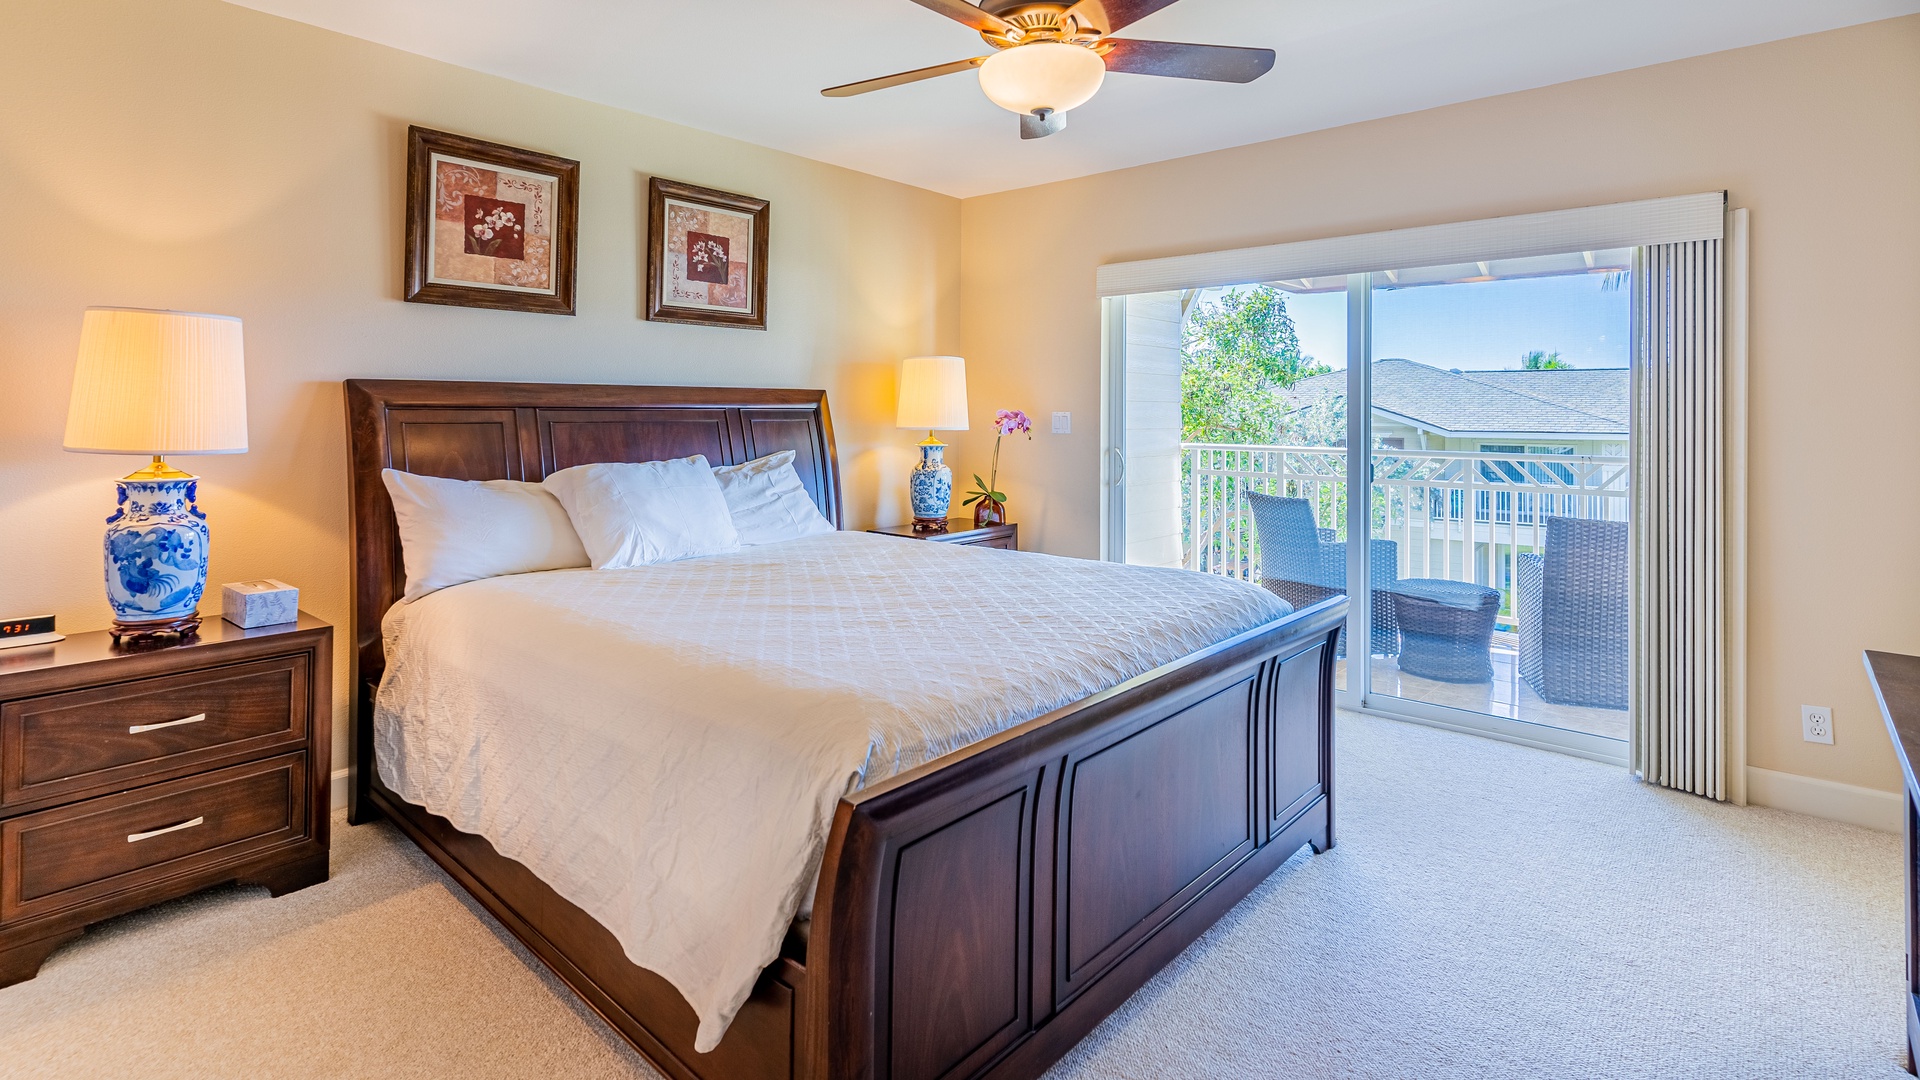 Kapolei Vacation Rentals, Ko Olina Kai 1033C - The spacious primary guest bedroom upstairs with a ceiling fan and soft linens.